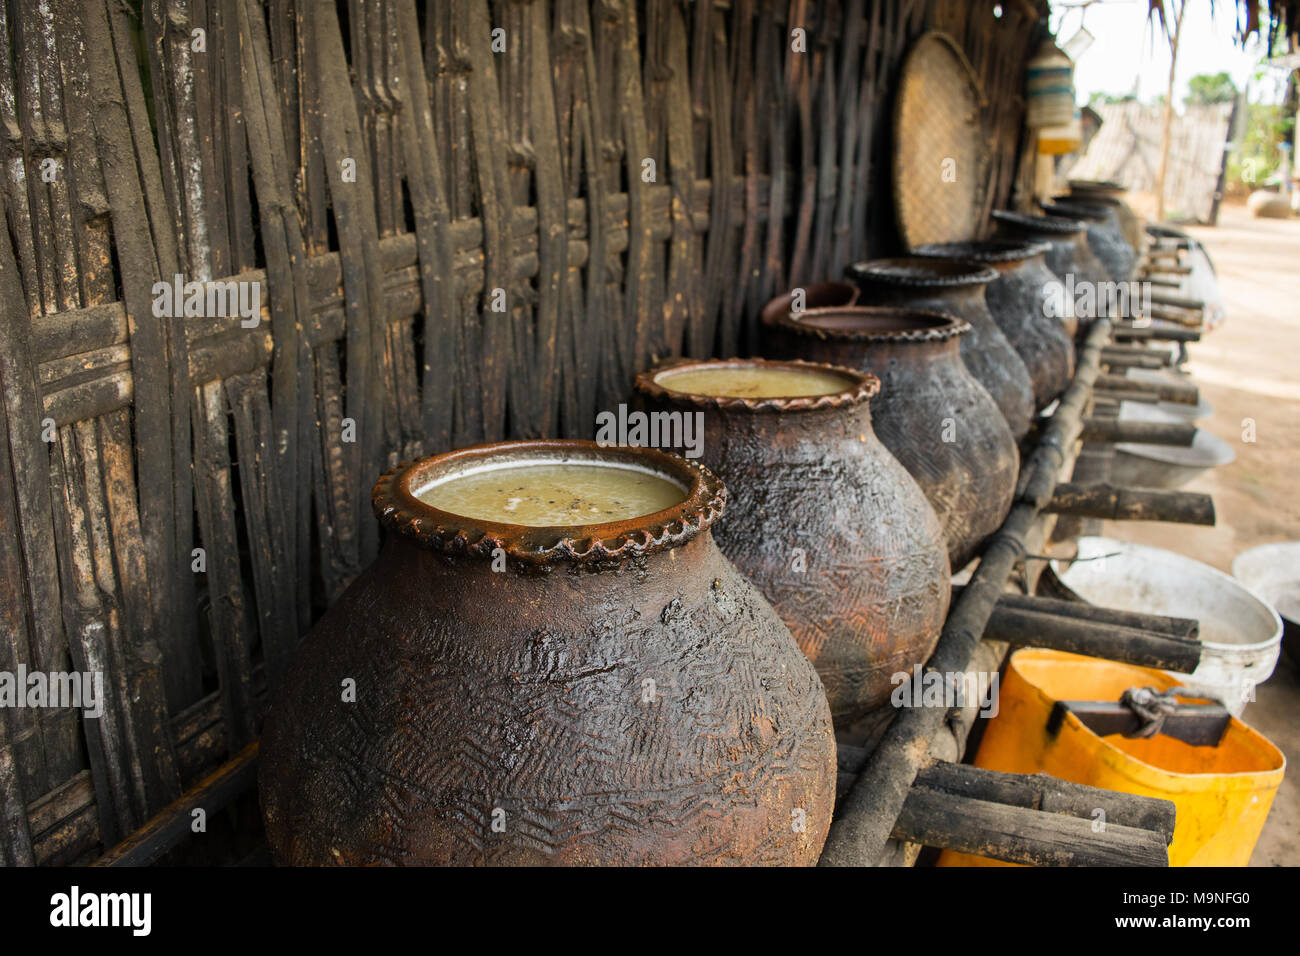 Clay pots for fermentation and distillation of palm juice and sap for local palm alcohol, palm wine, toddy wine, htan ye, near Bagan, Myanmar, Burma Stock Photo